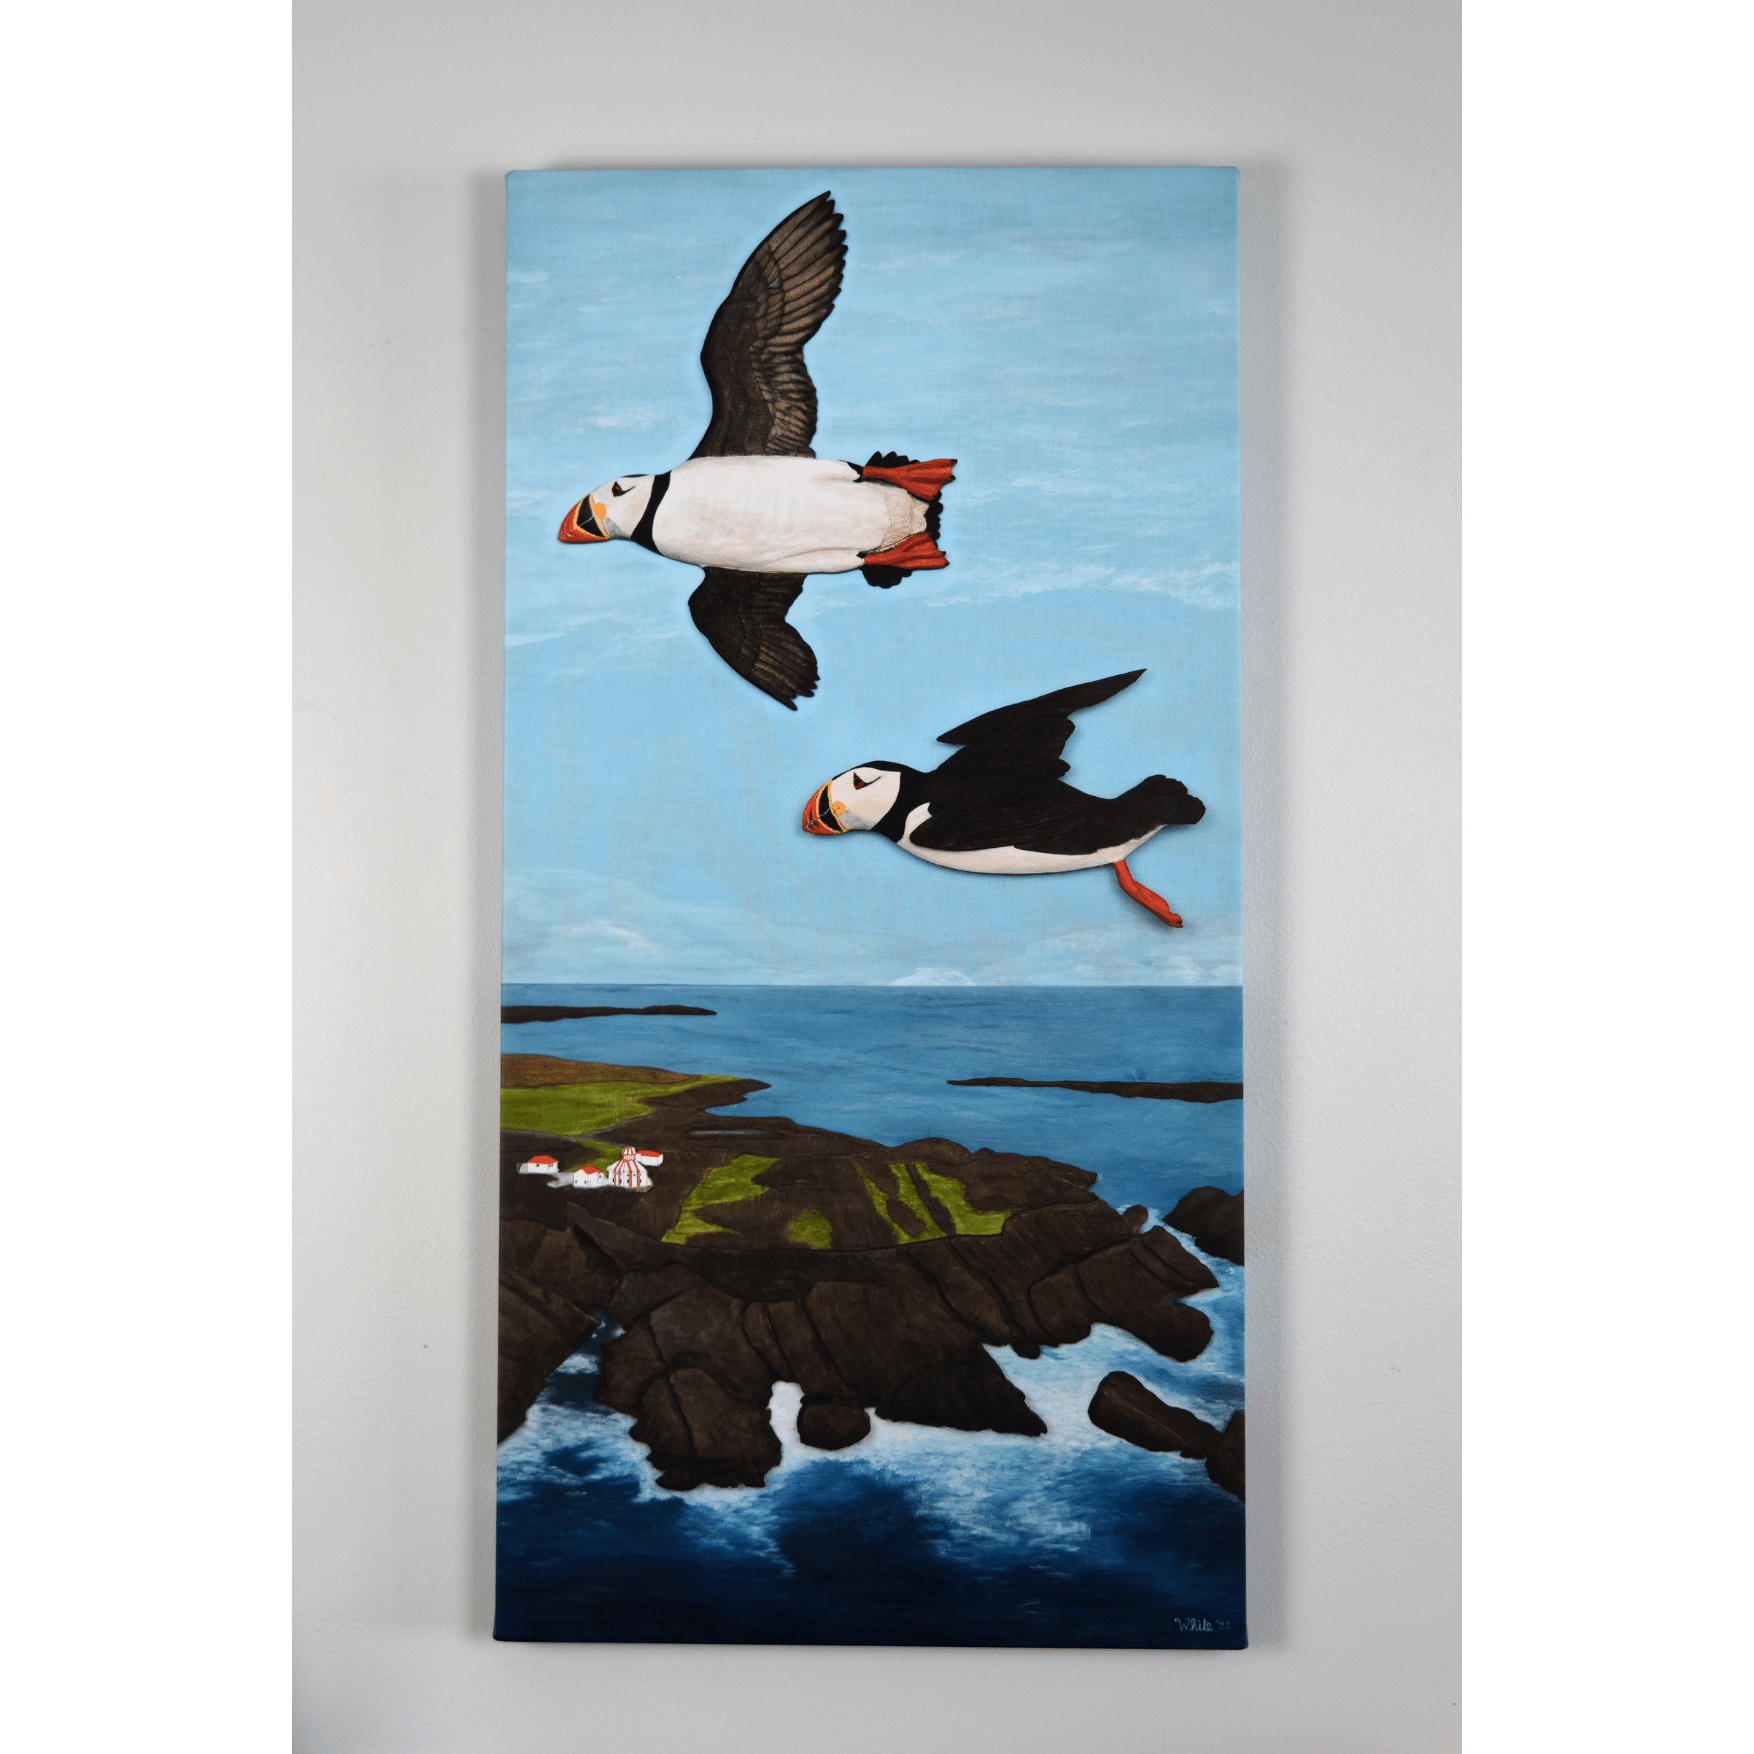 "Over the Cape" reproduction print showcases two puffins flying over the rugged Newfoundland coast.